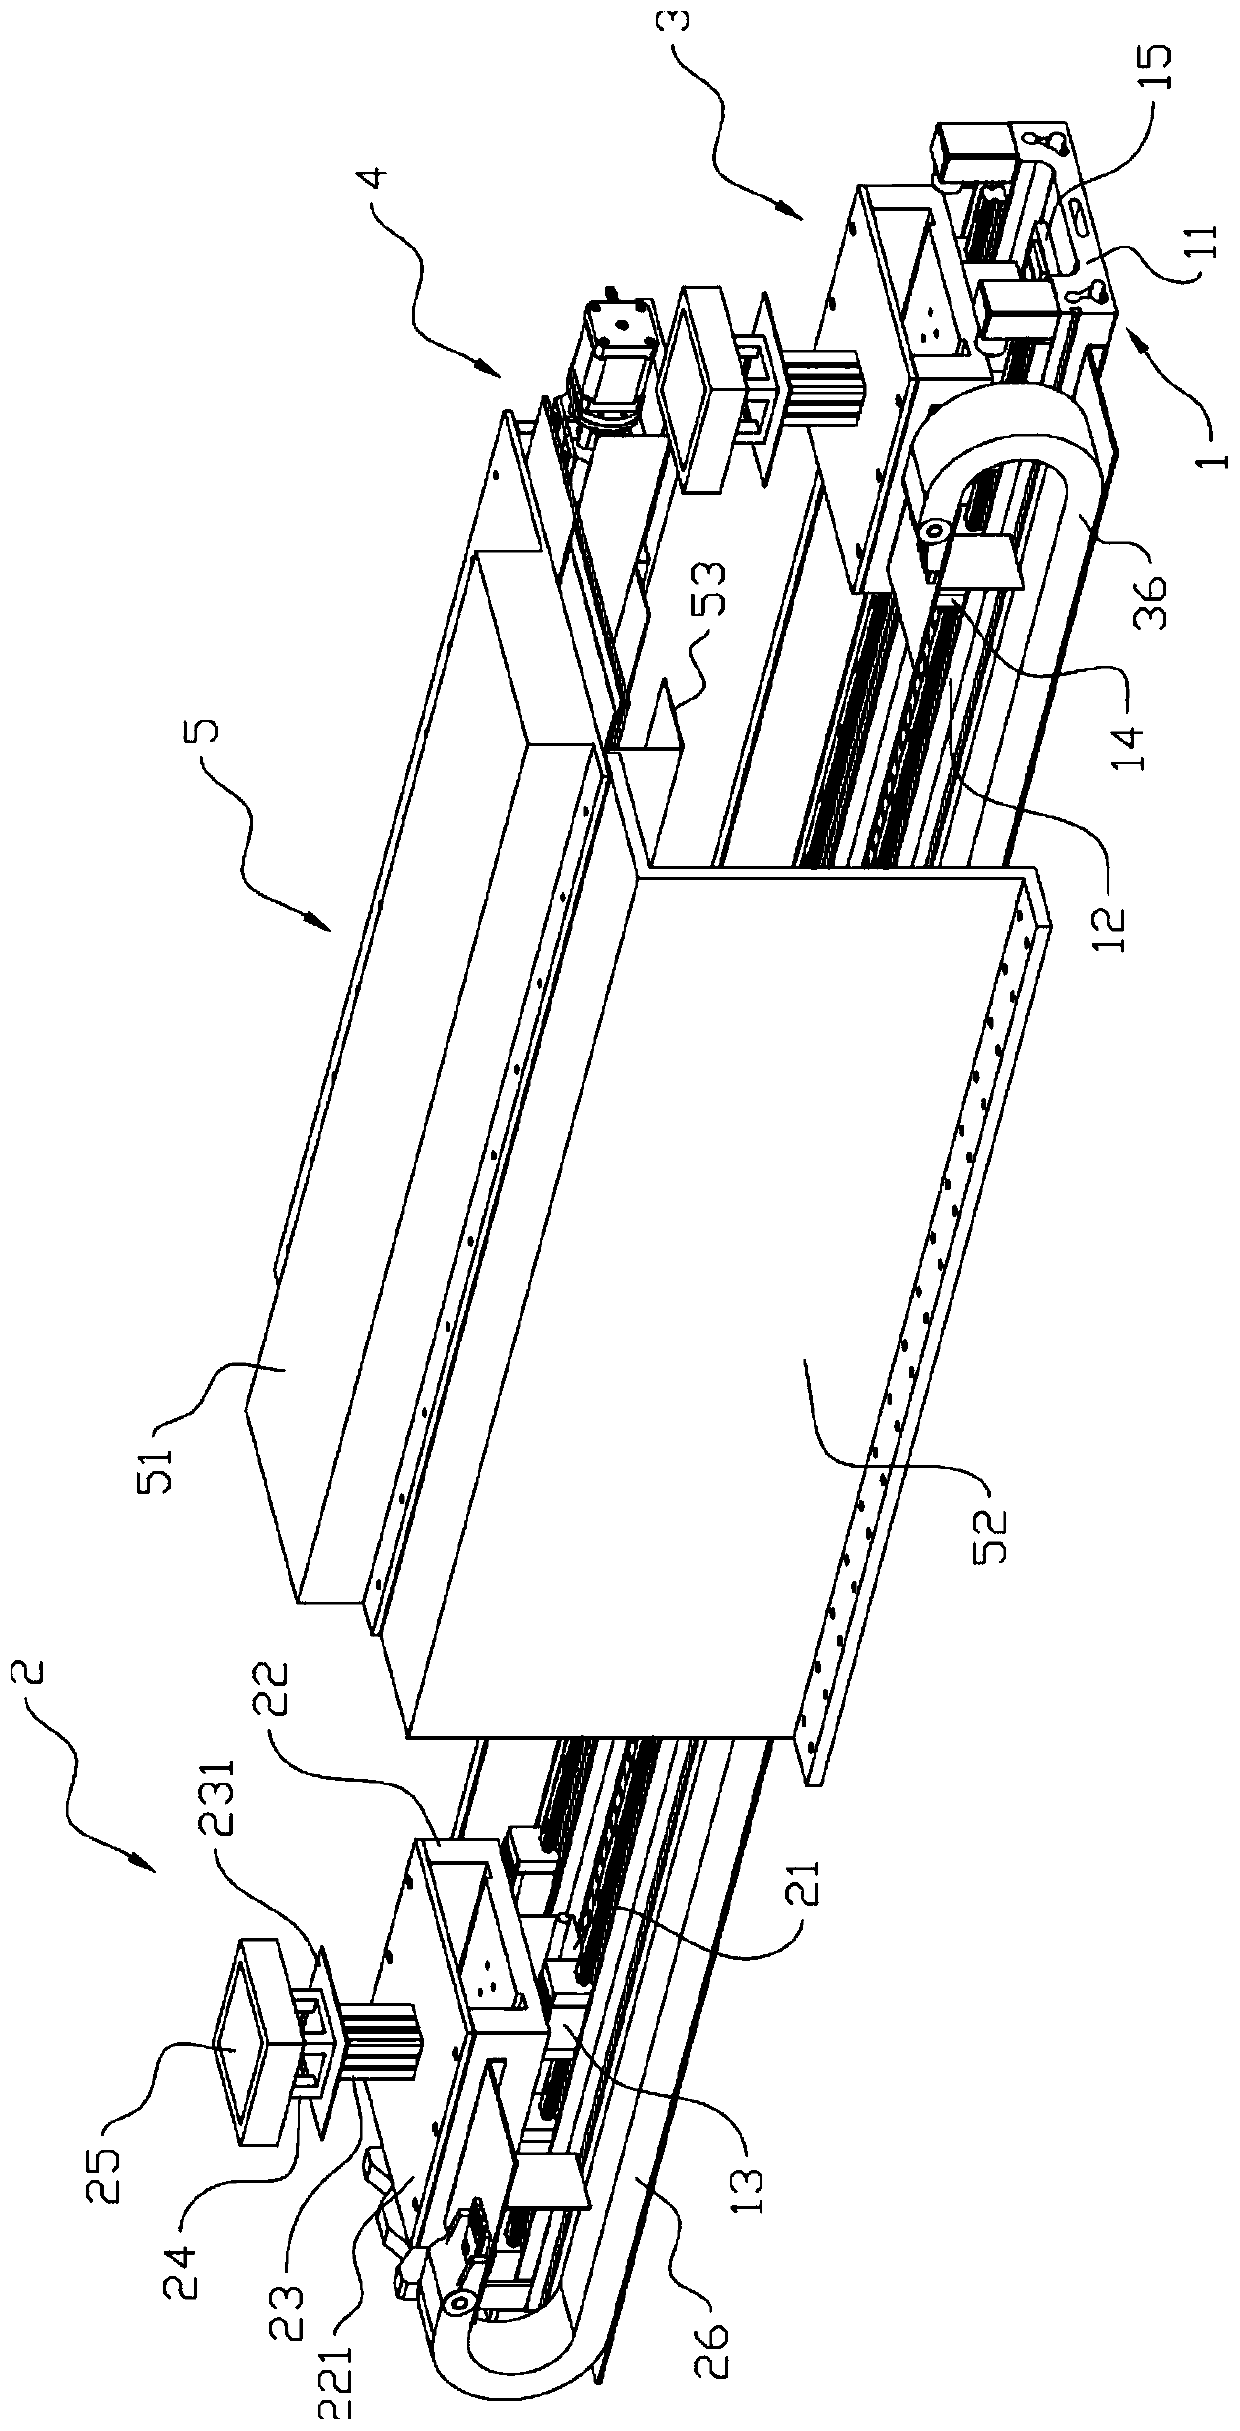 A substrate pick-and-place and transfer device